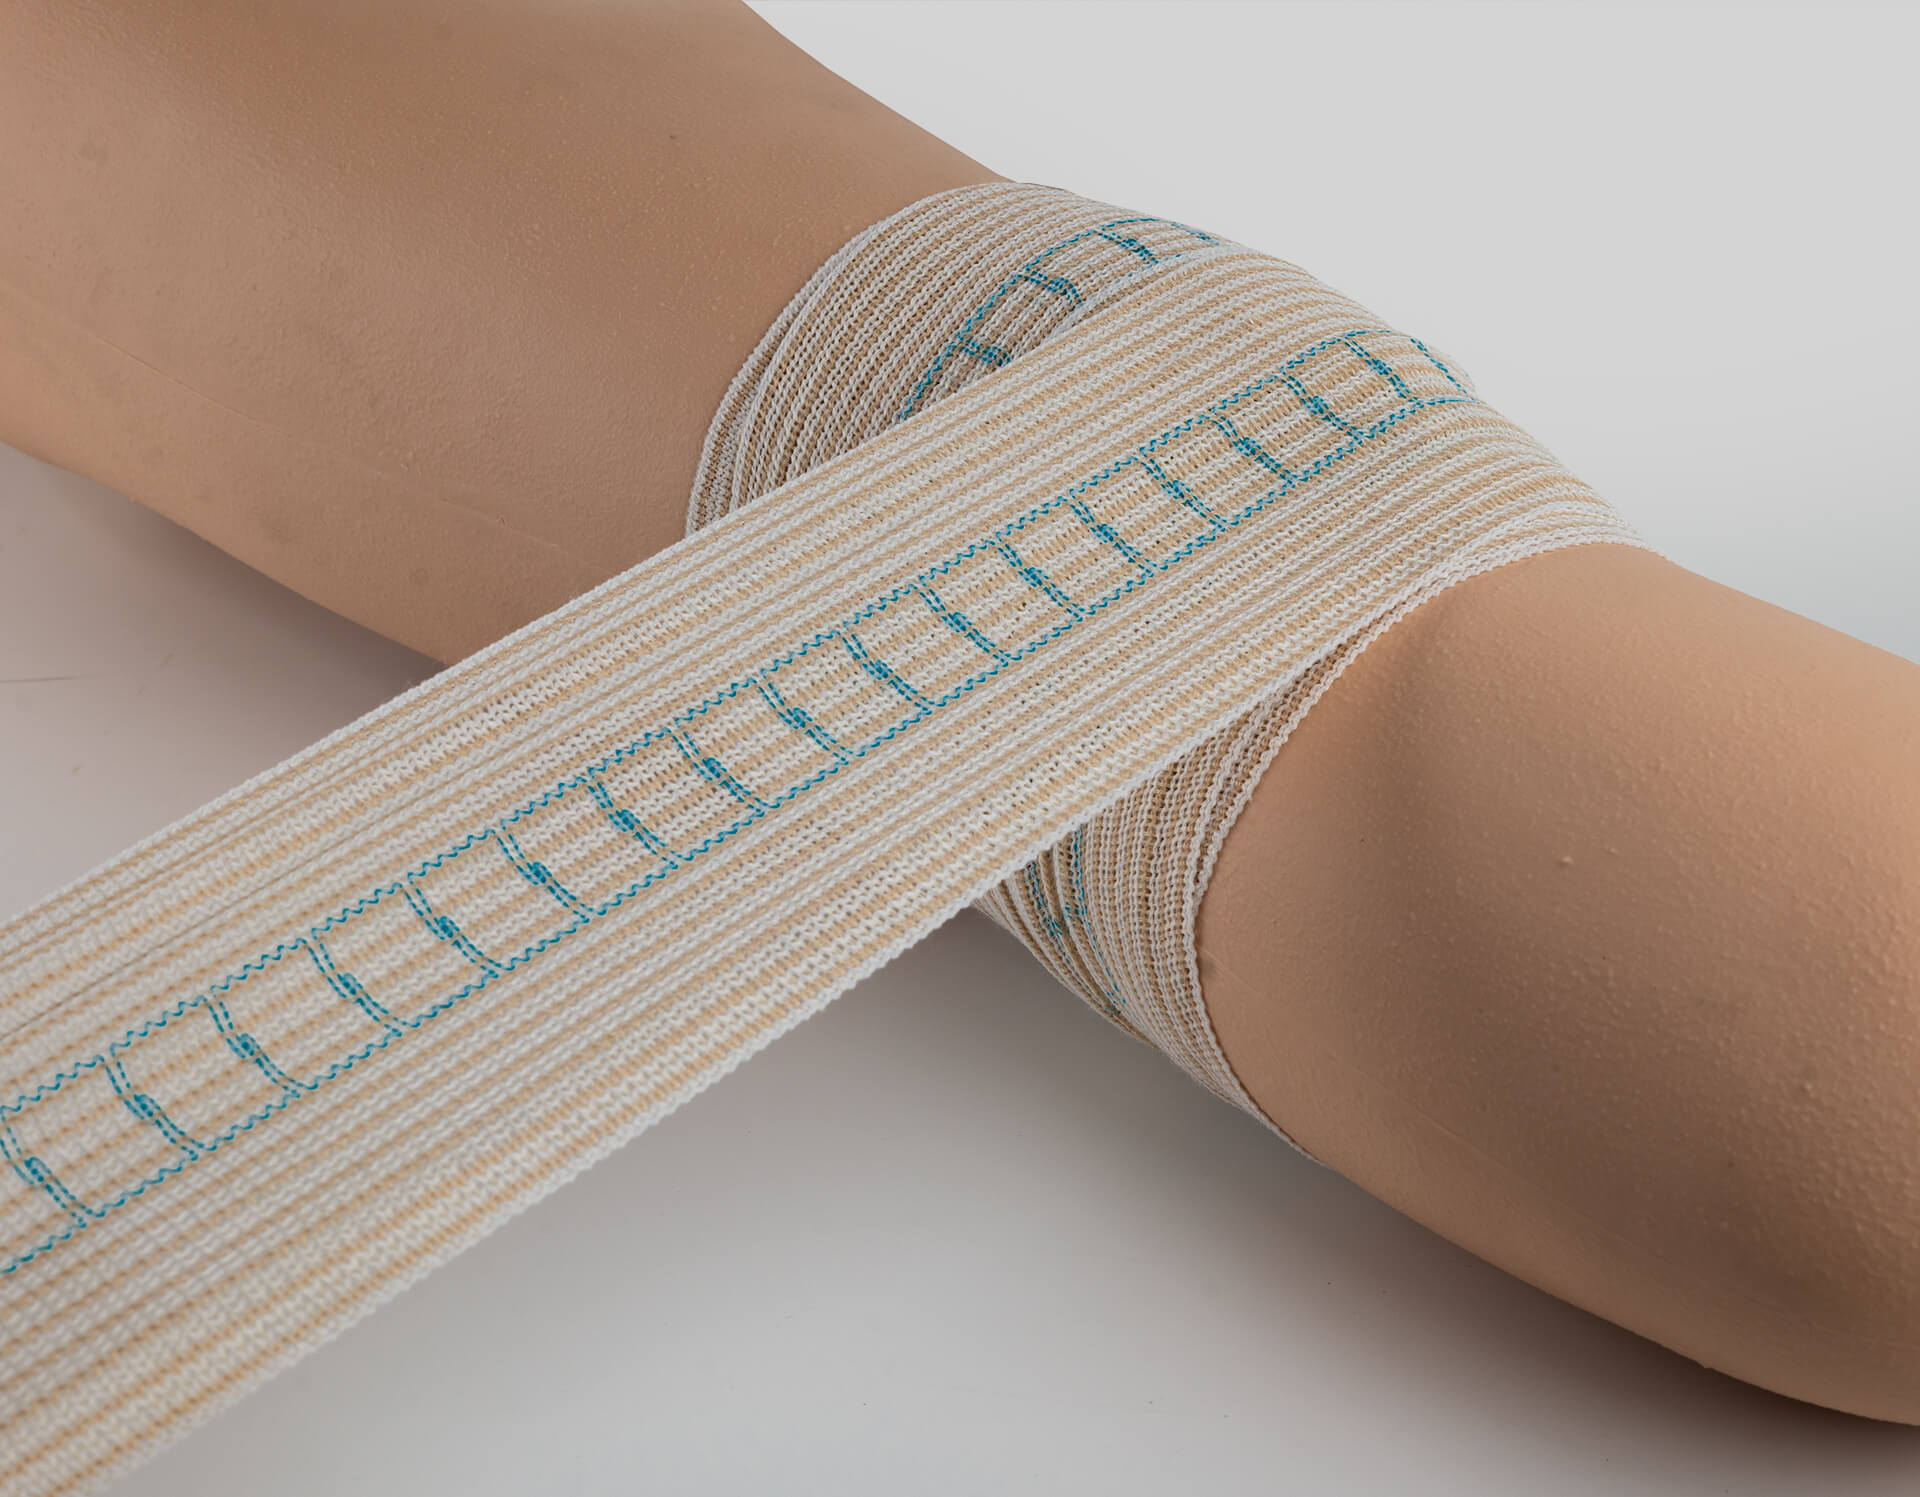 Therapy-Strap™ Cohesive